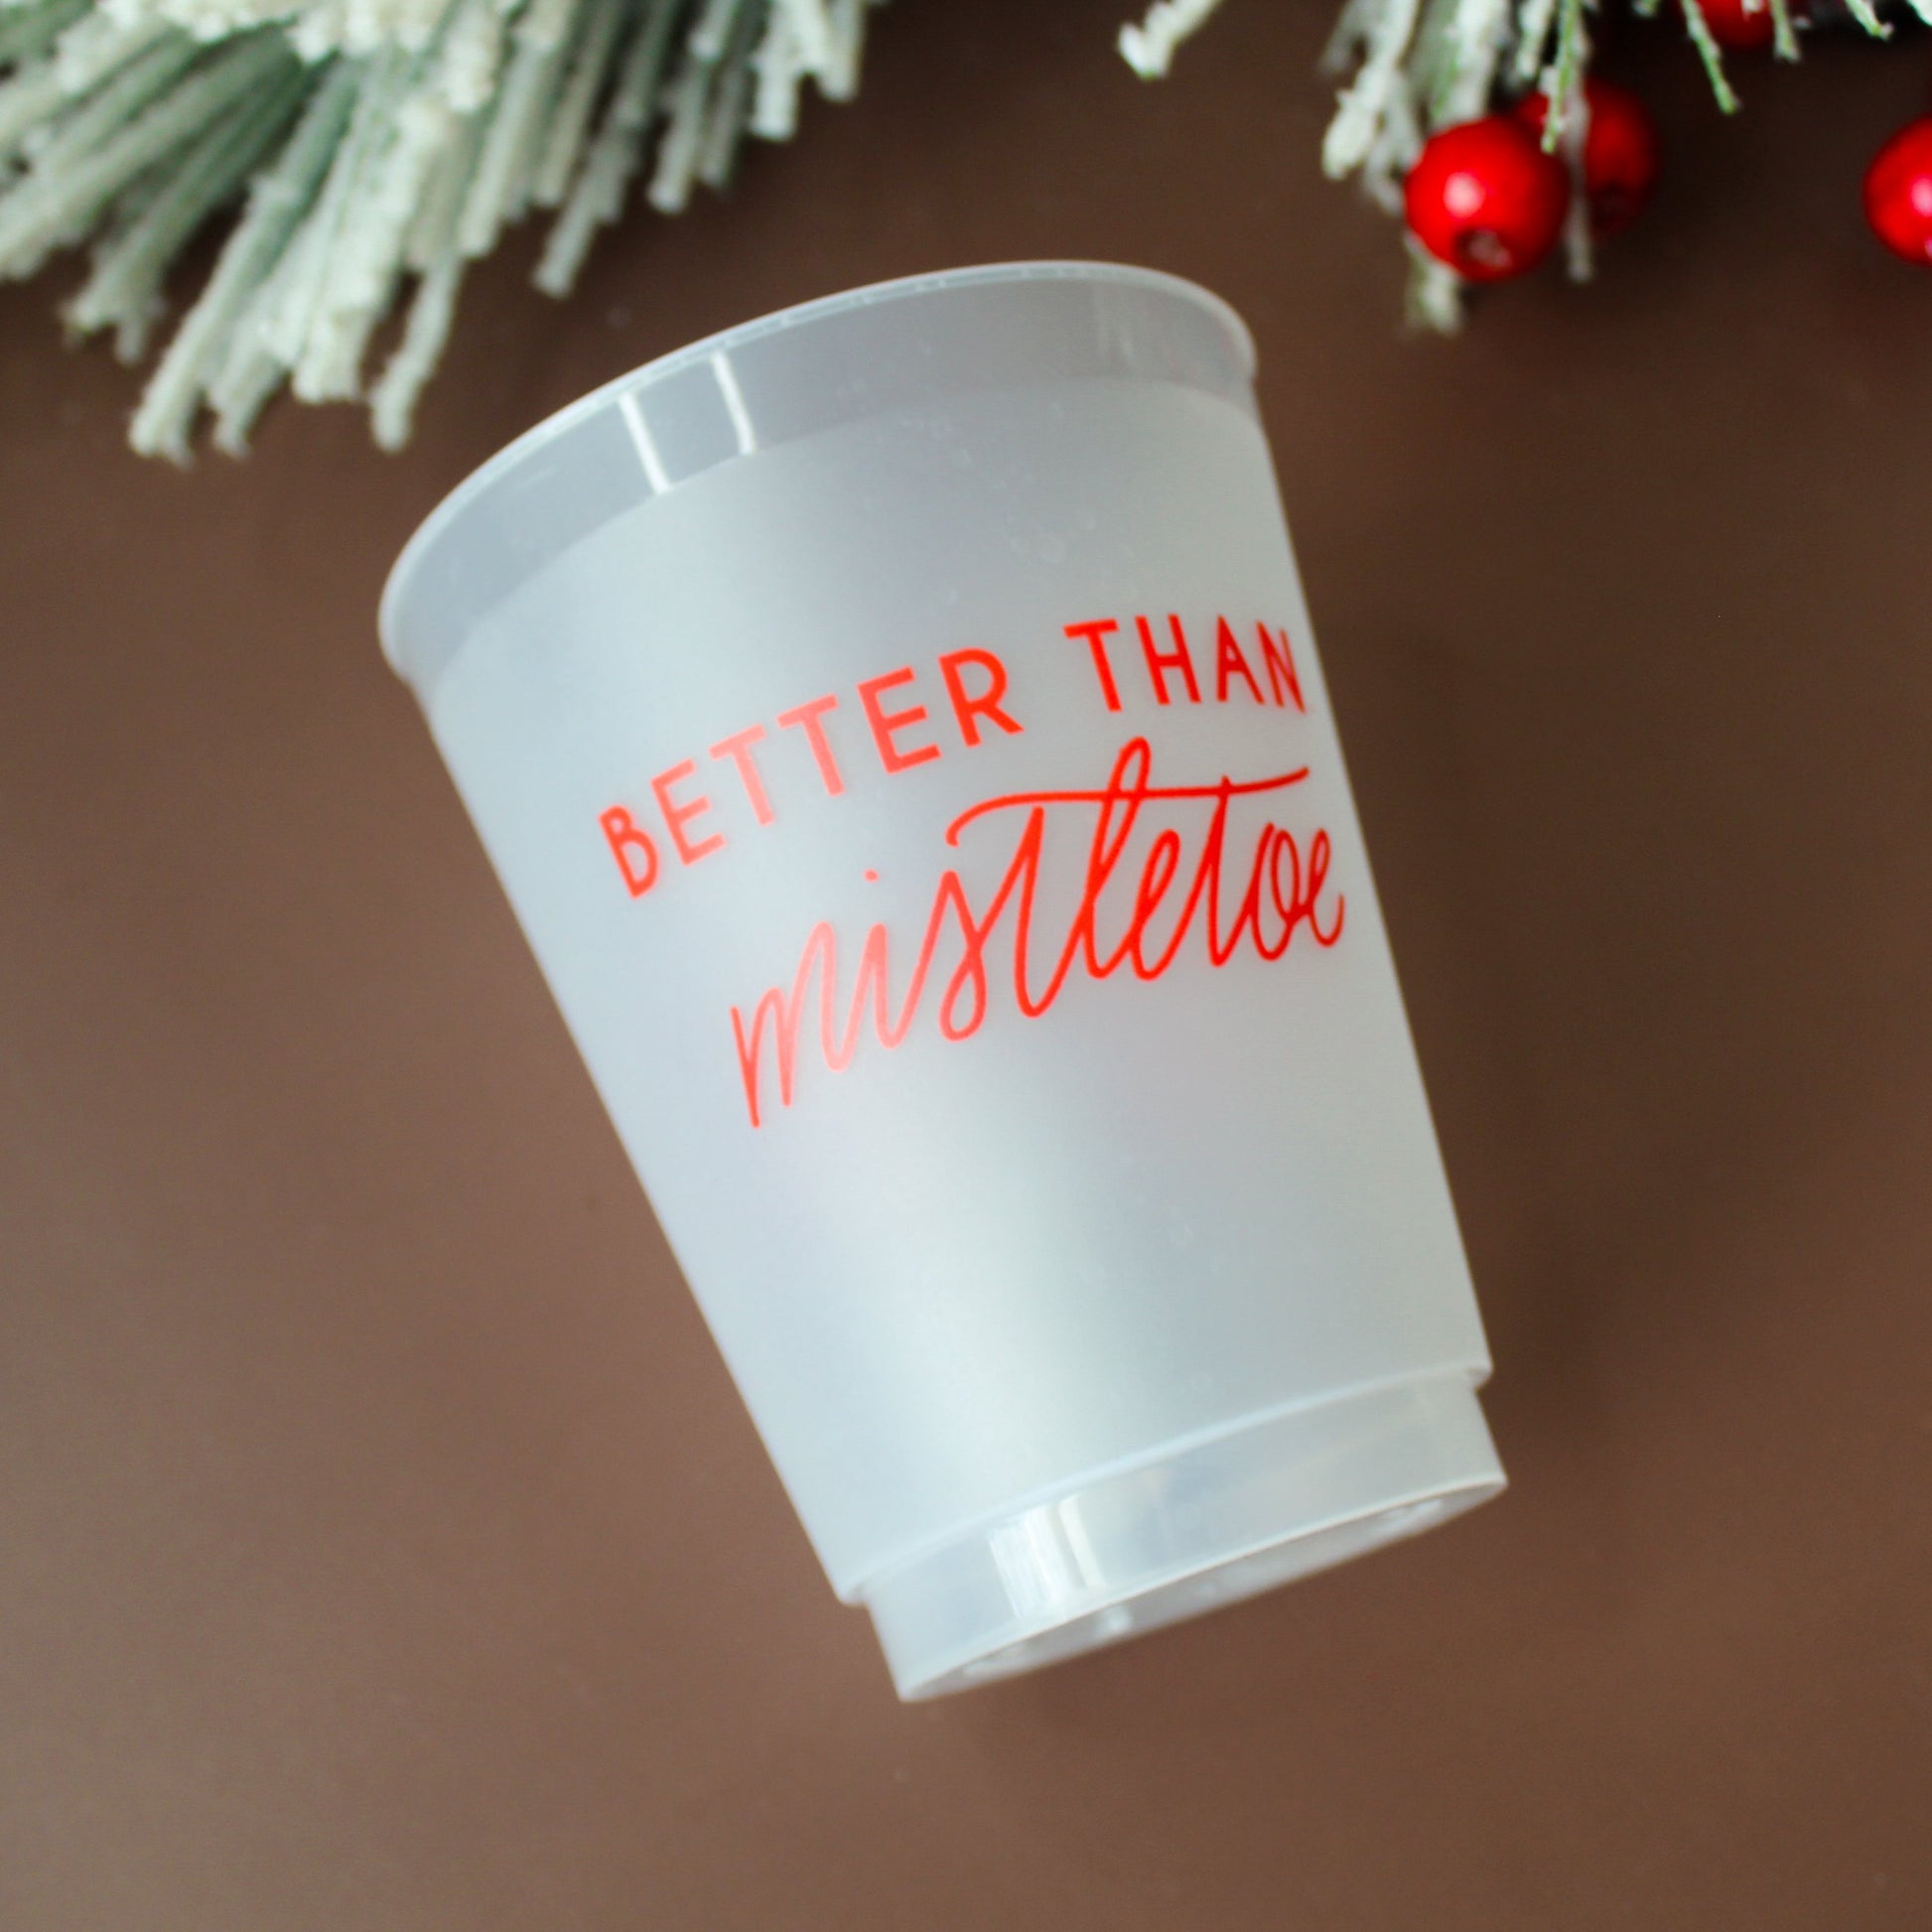 holiday cocktails, 'Better Than Mistletoe party cup. holiday party, hostess gift